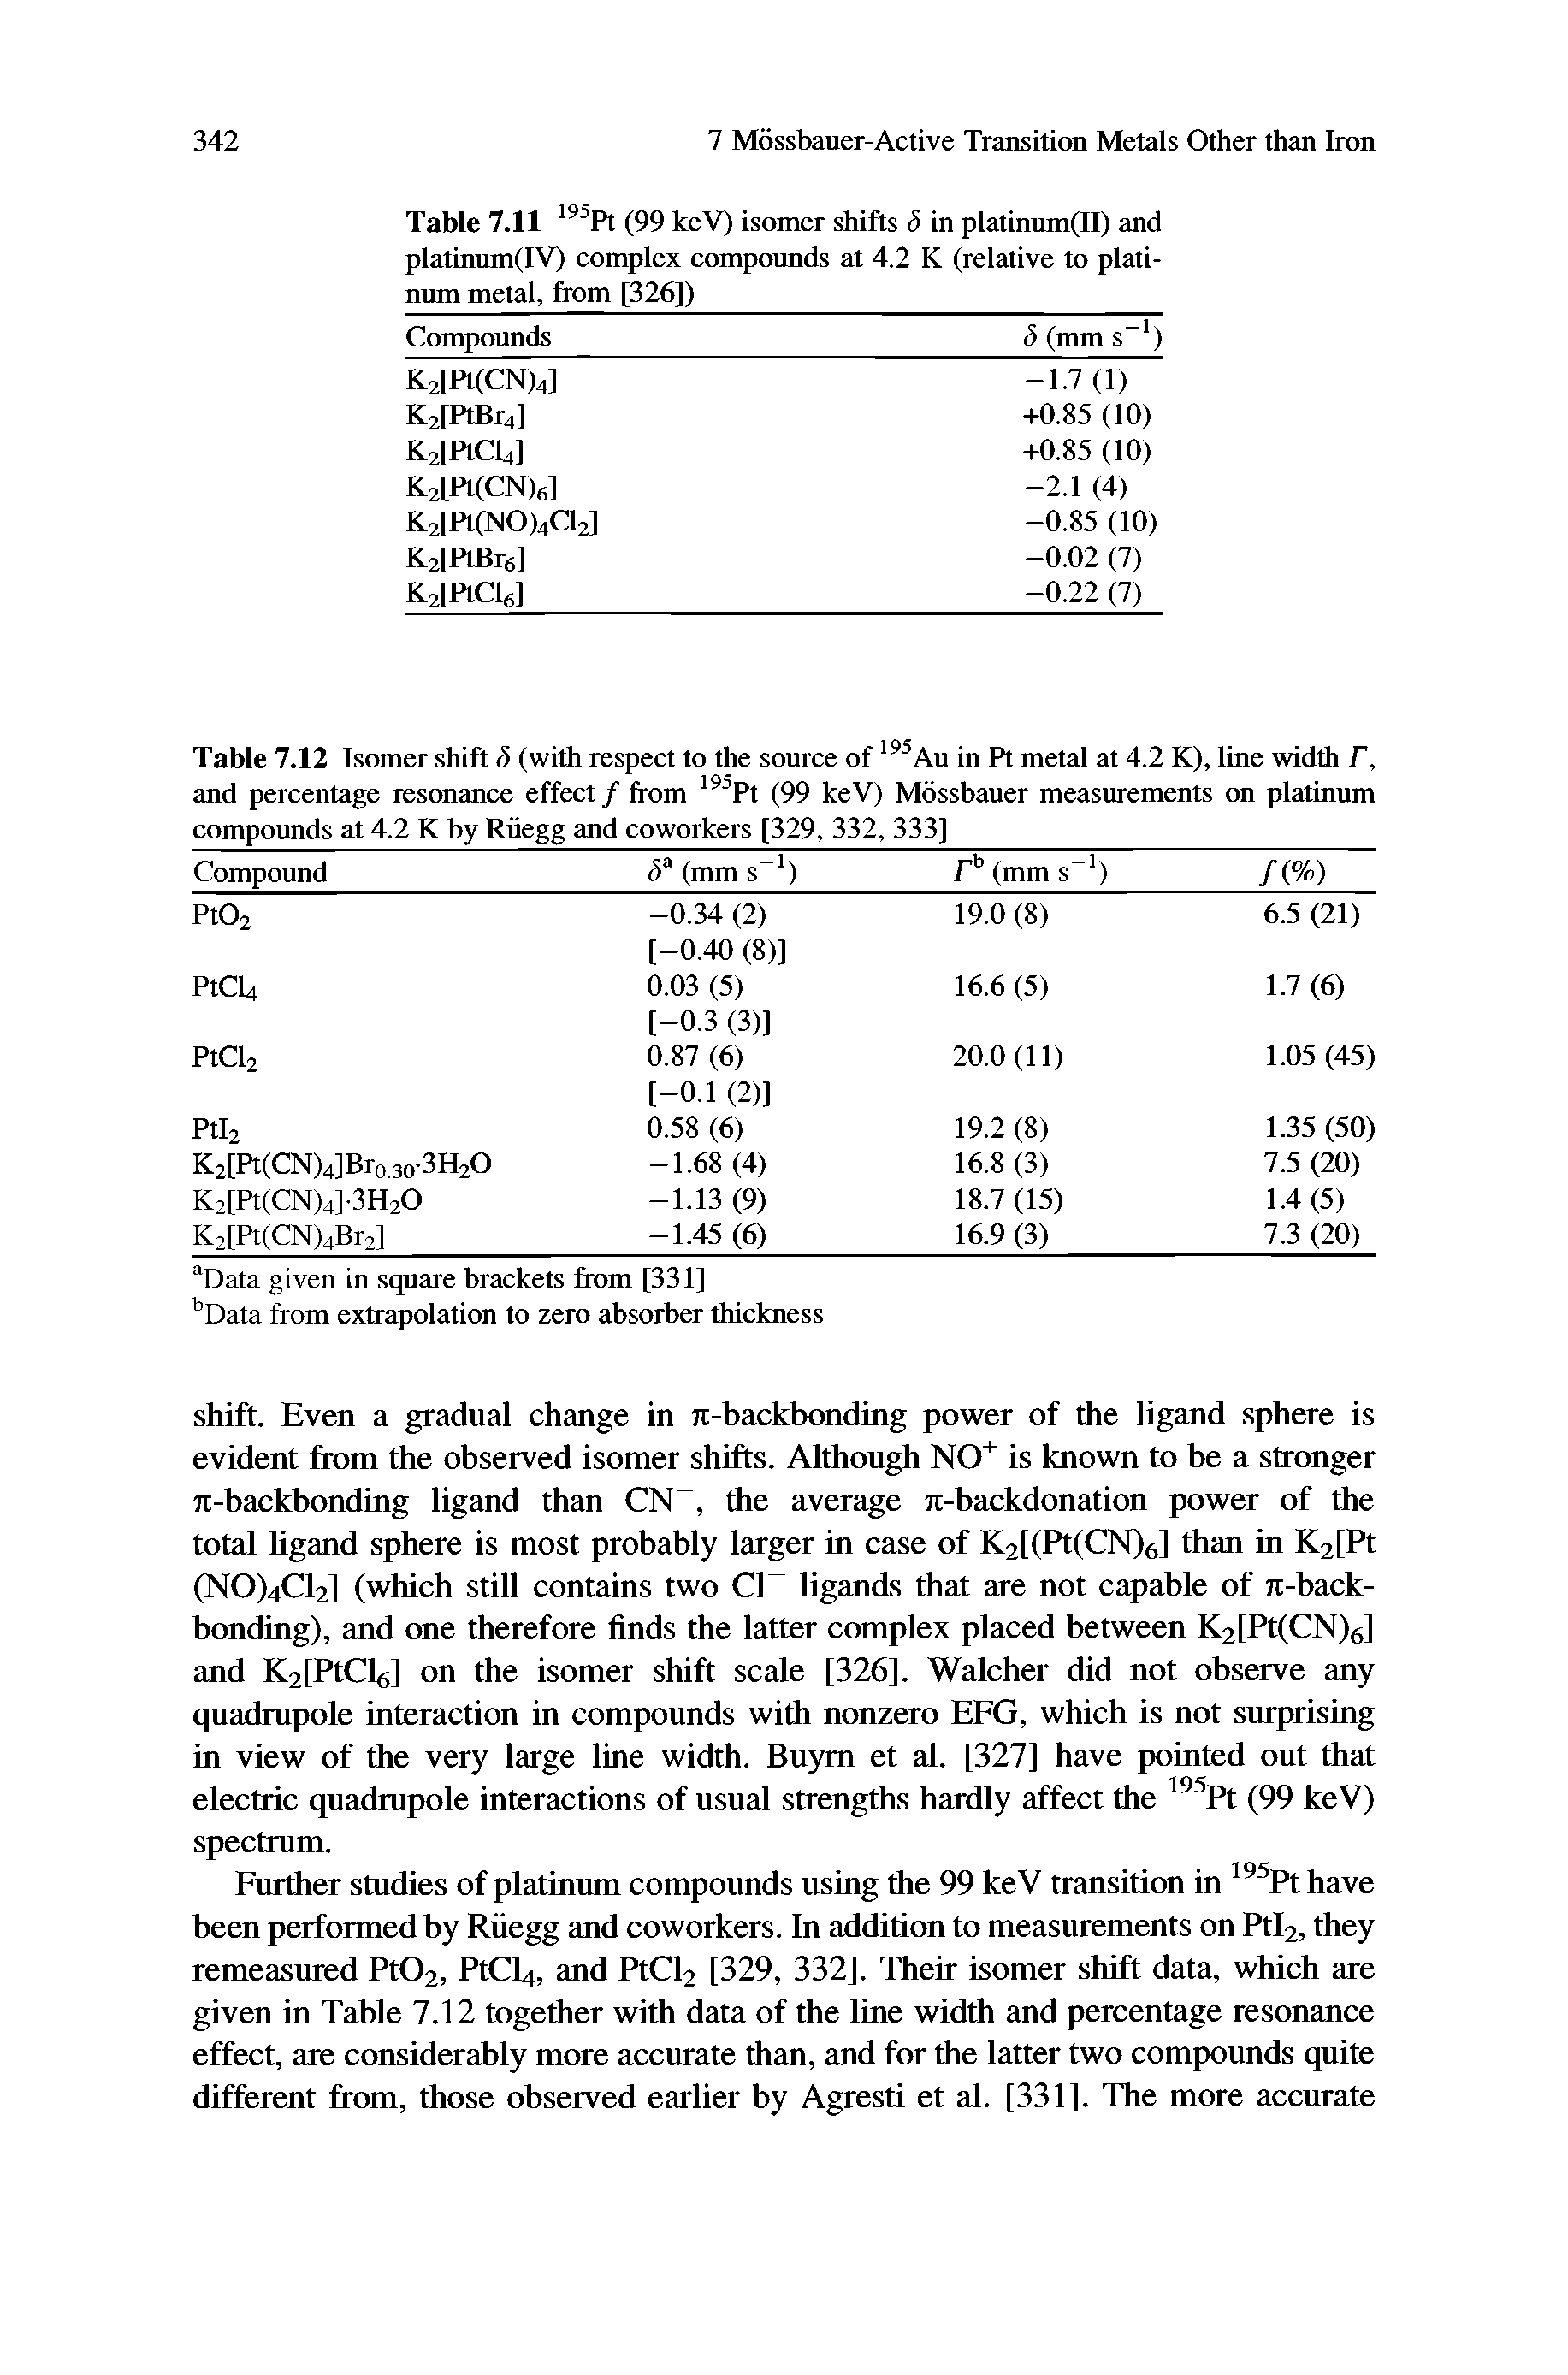 Table 7.12 Isomer shift 5 (with respect to the source of Au in Pt metal at 4.2 K), line width F, and percentage resonance effect / from Pt (99 keV) Mdssbauer measurements on platinum compounds at 4.2 K by Riiegg and coworkers [329, 332, 333]...